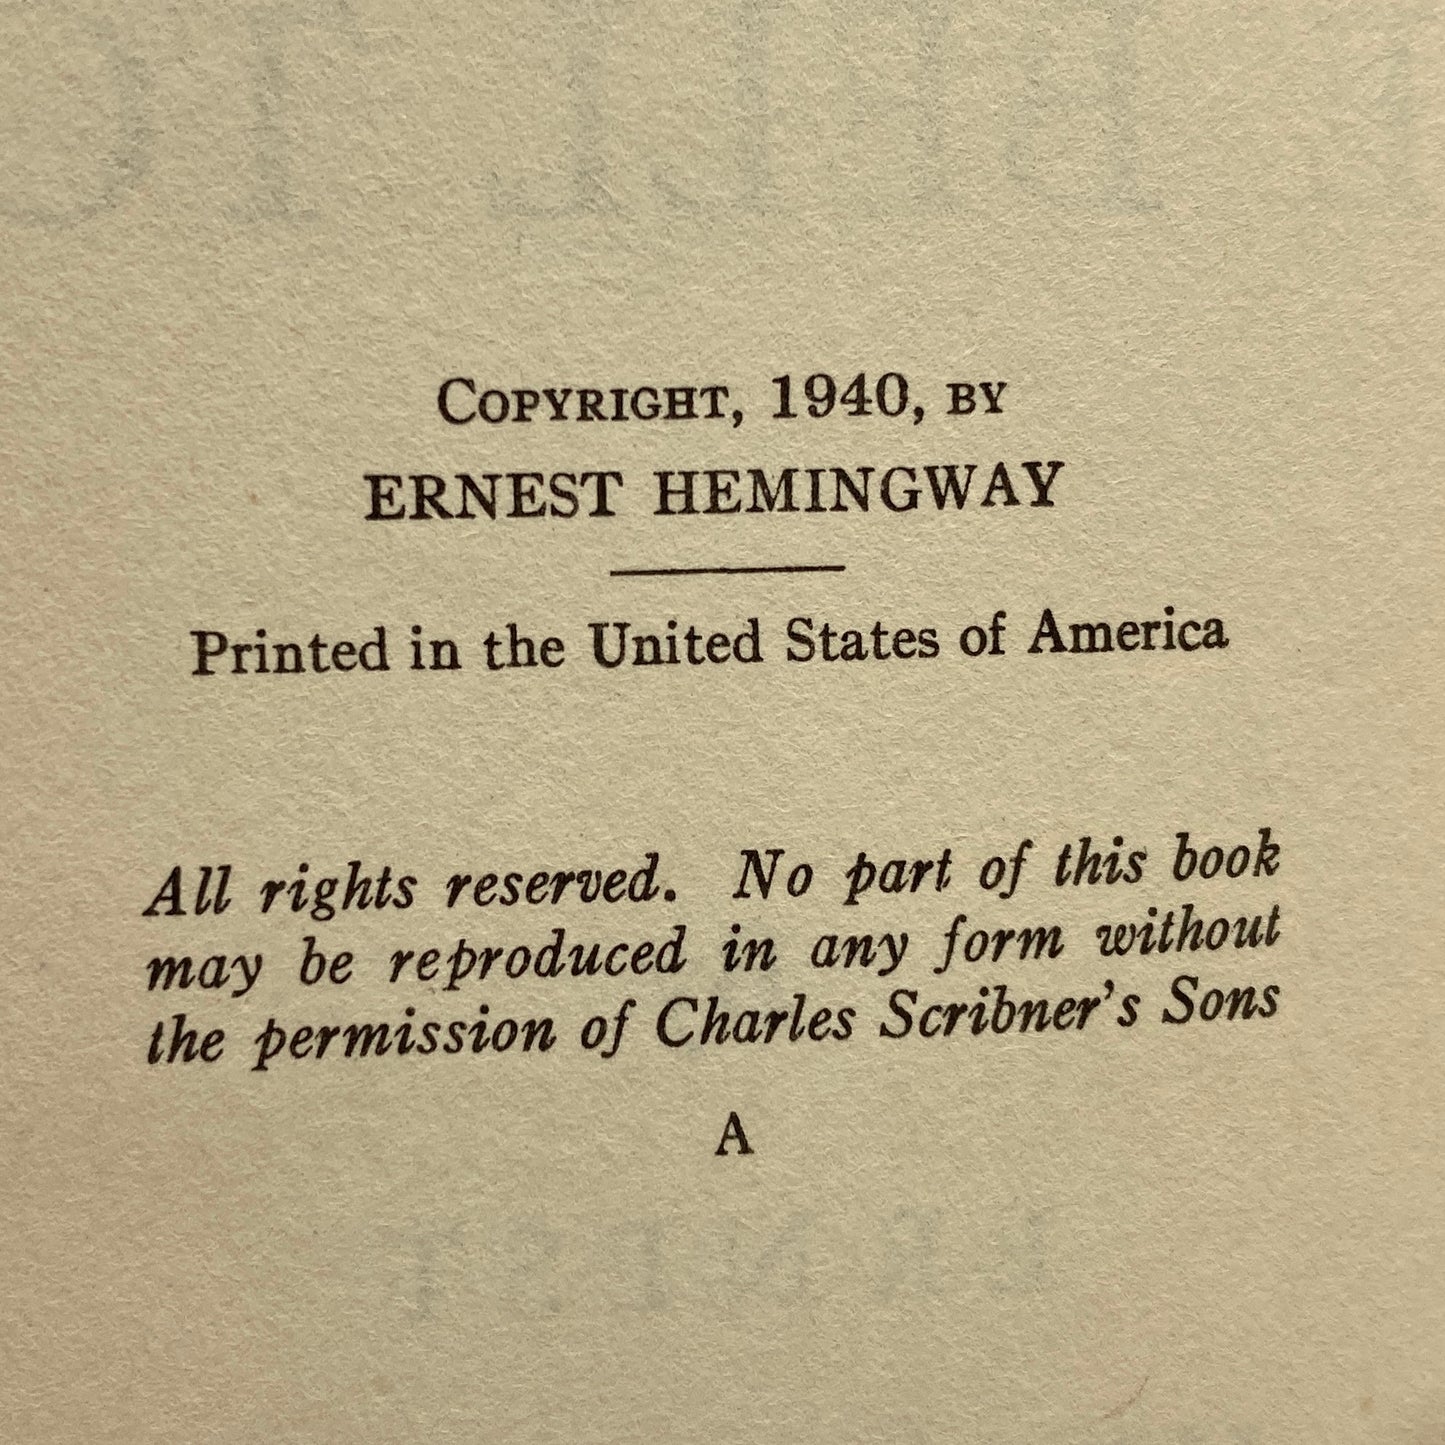 HEMINGWAY, Ernest "For Whom the Bell Tolls" [Scribners, 1940] 1st Edition